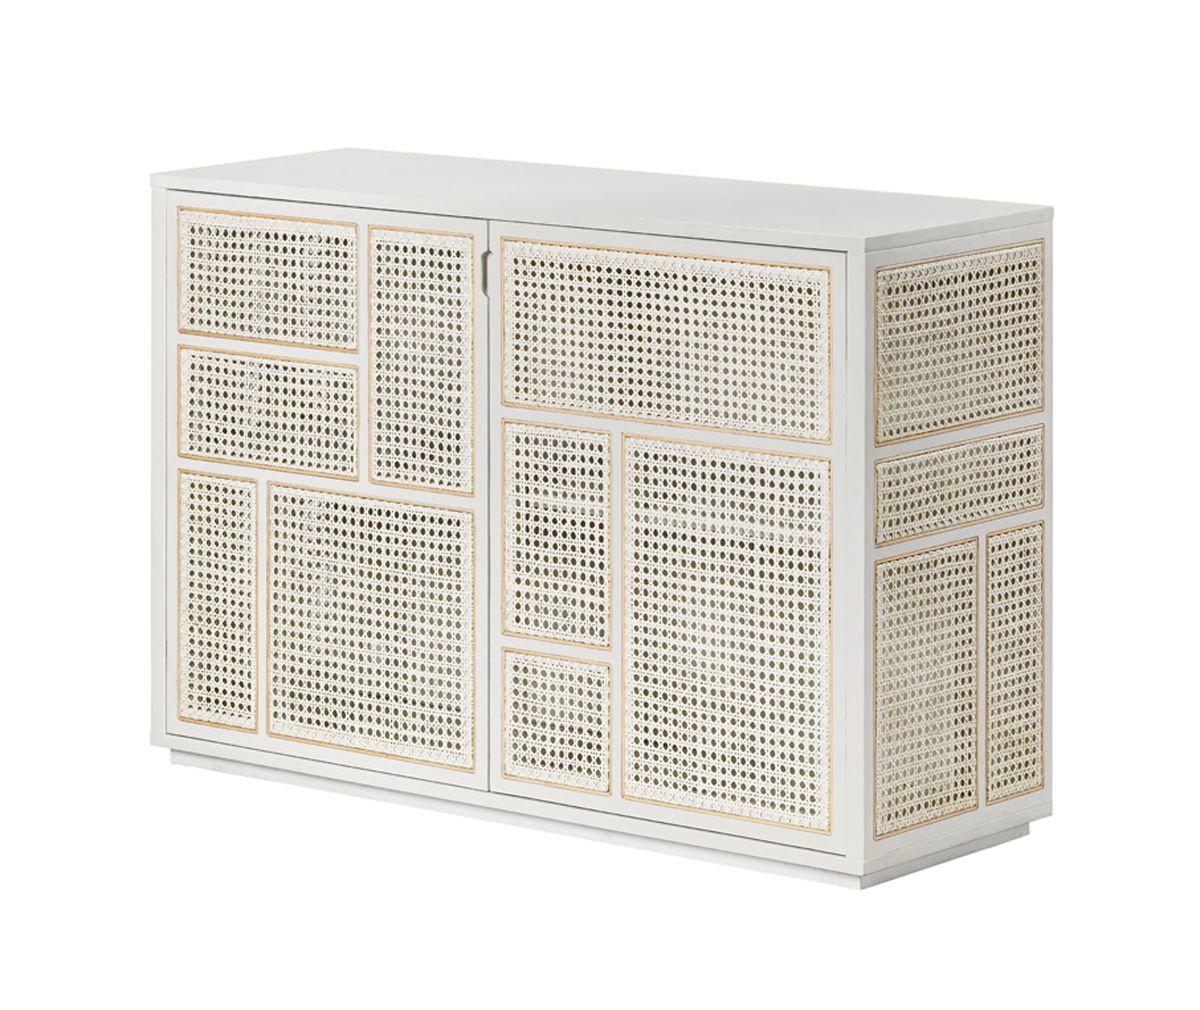 Design House Stockholm Air Low Sideboard White/Rattan, 120 x 81 cm